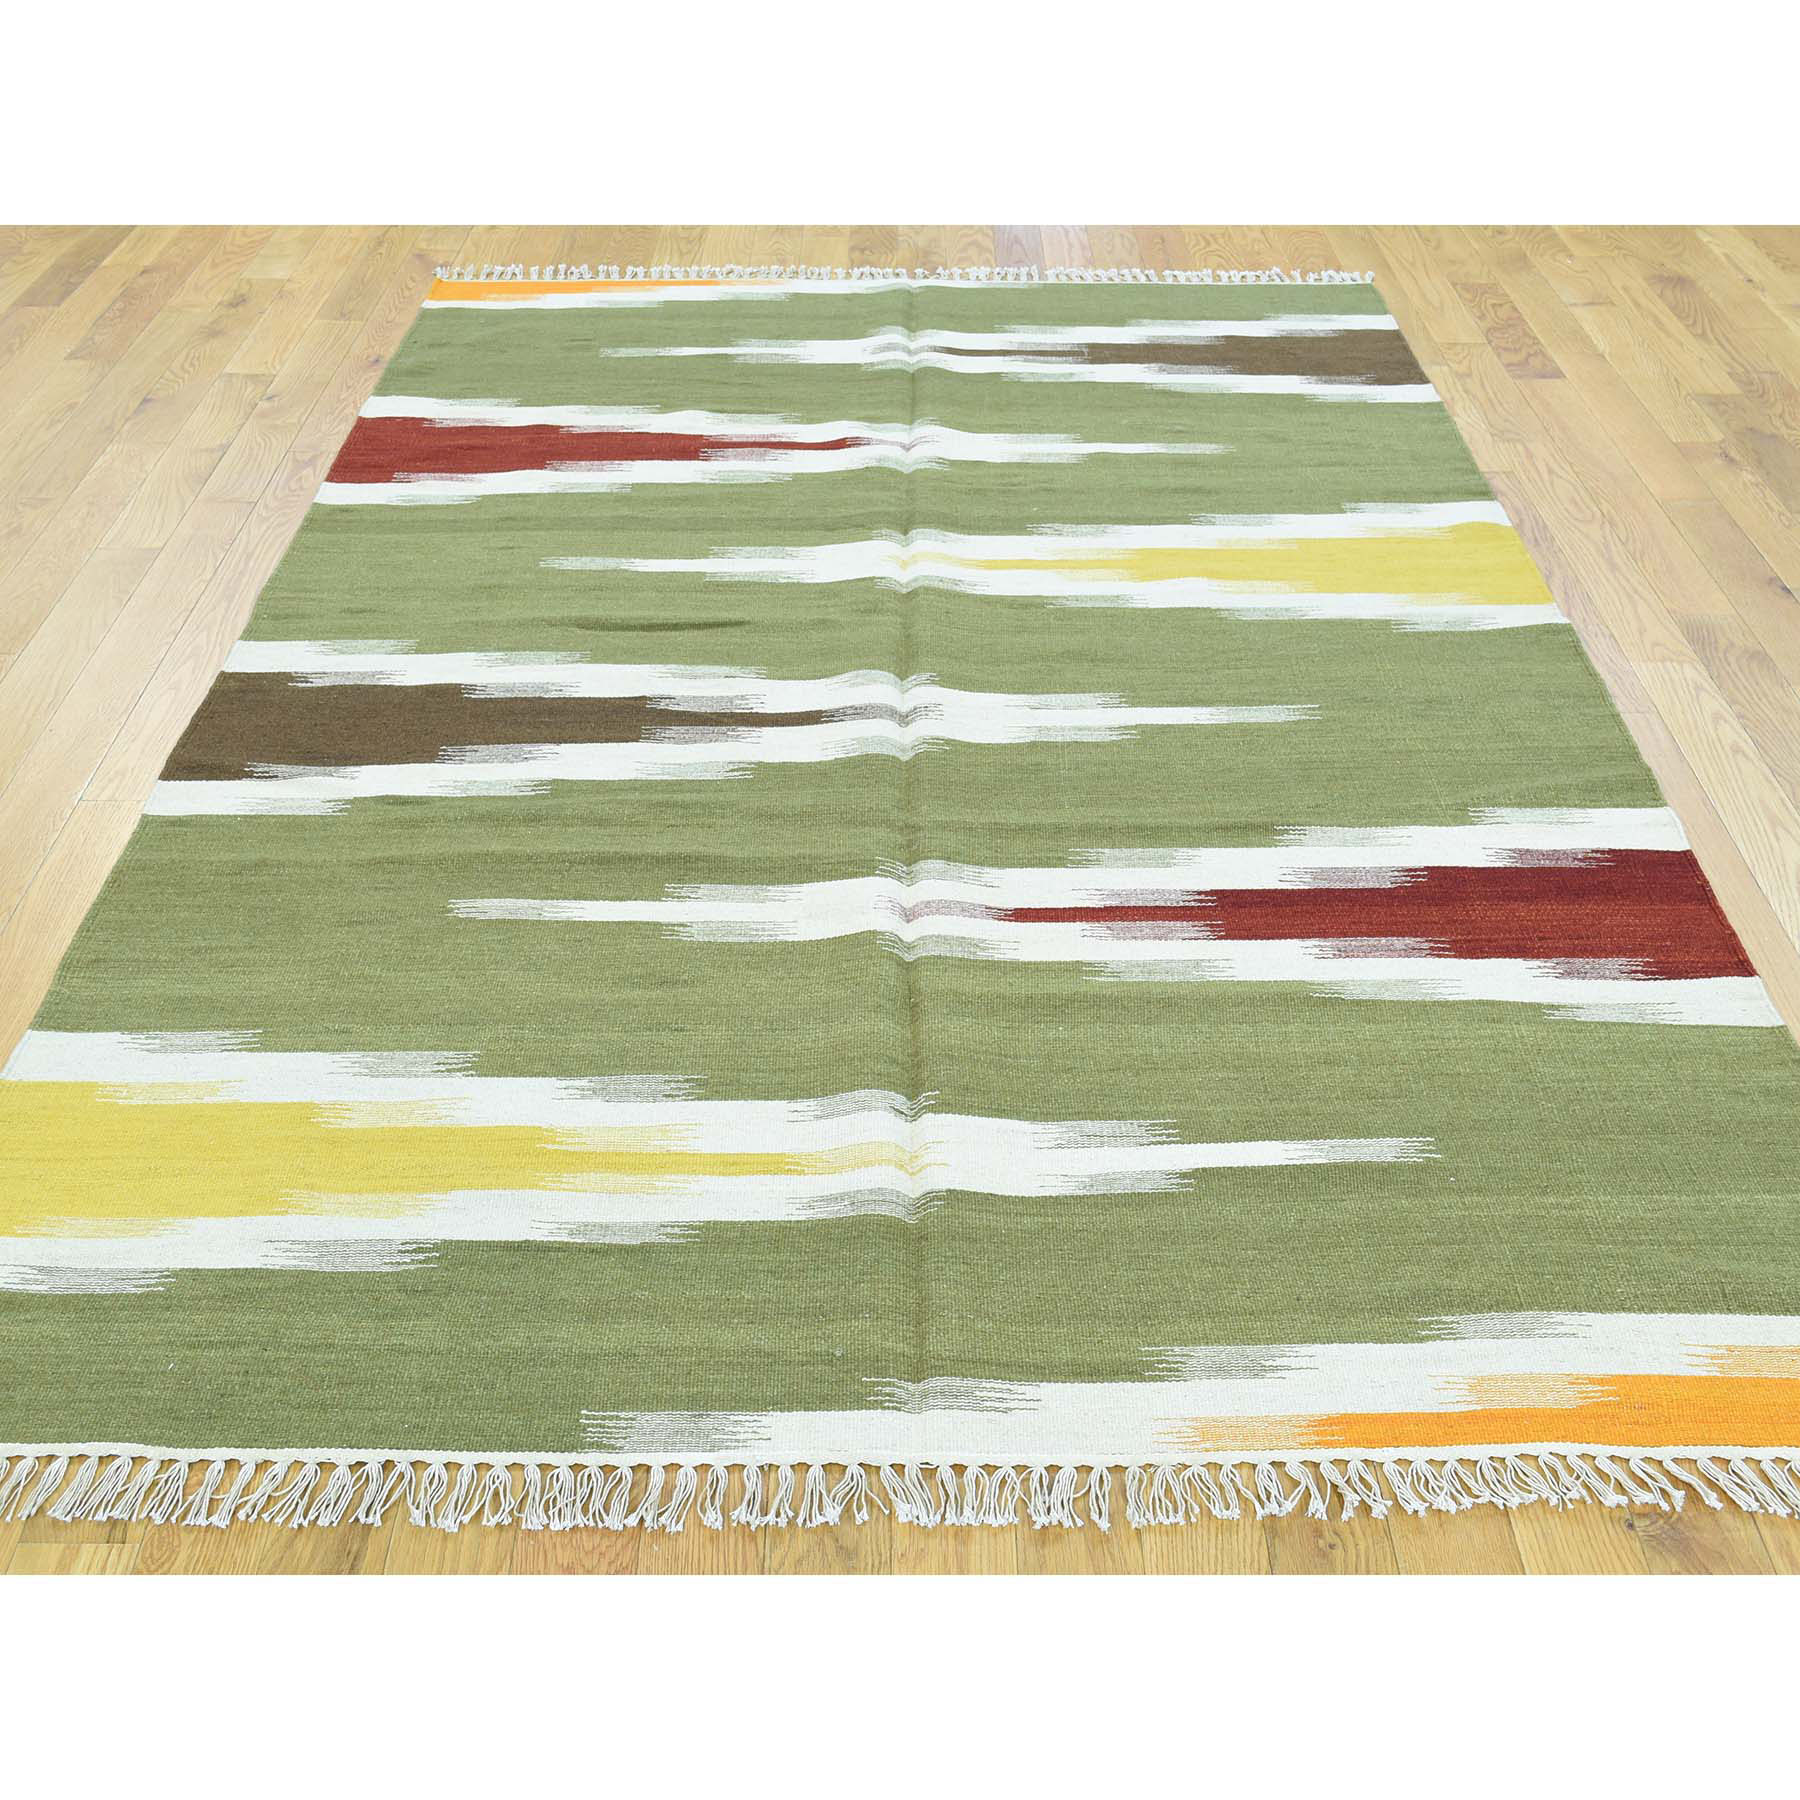 5-1 x8-1  Flat Weave Reversible Kilim Pure Wool Hand-Woven Colorful Rug 